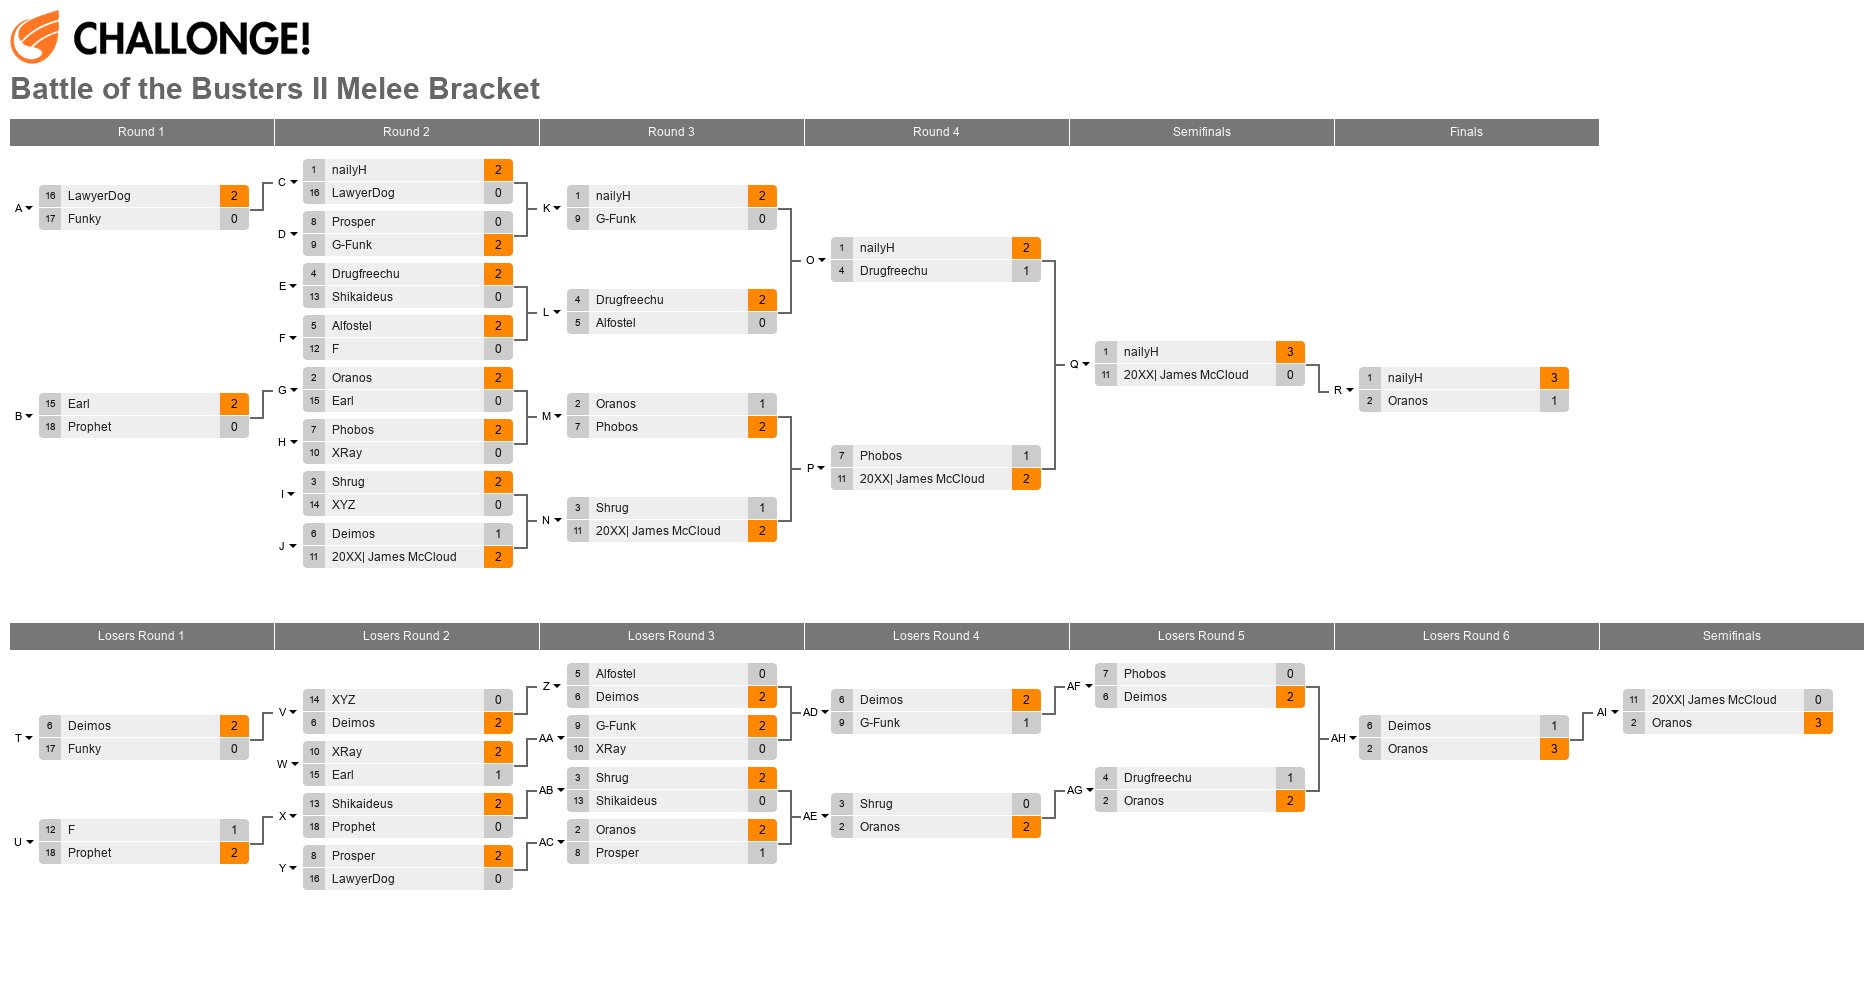 Battle of the Busters 2: Melee Bracket